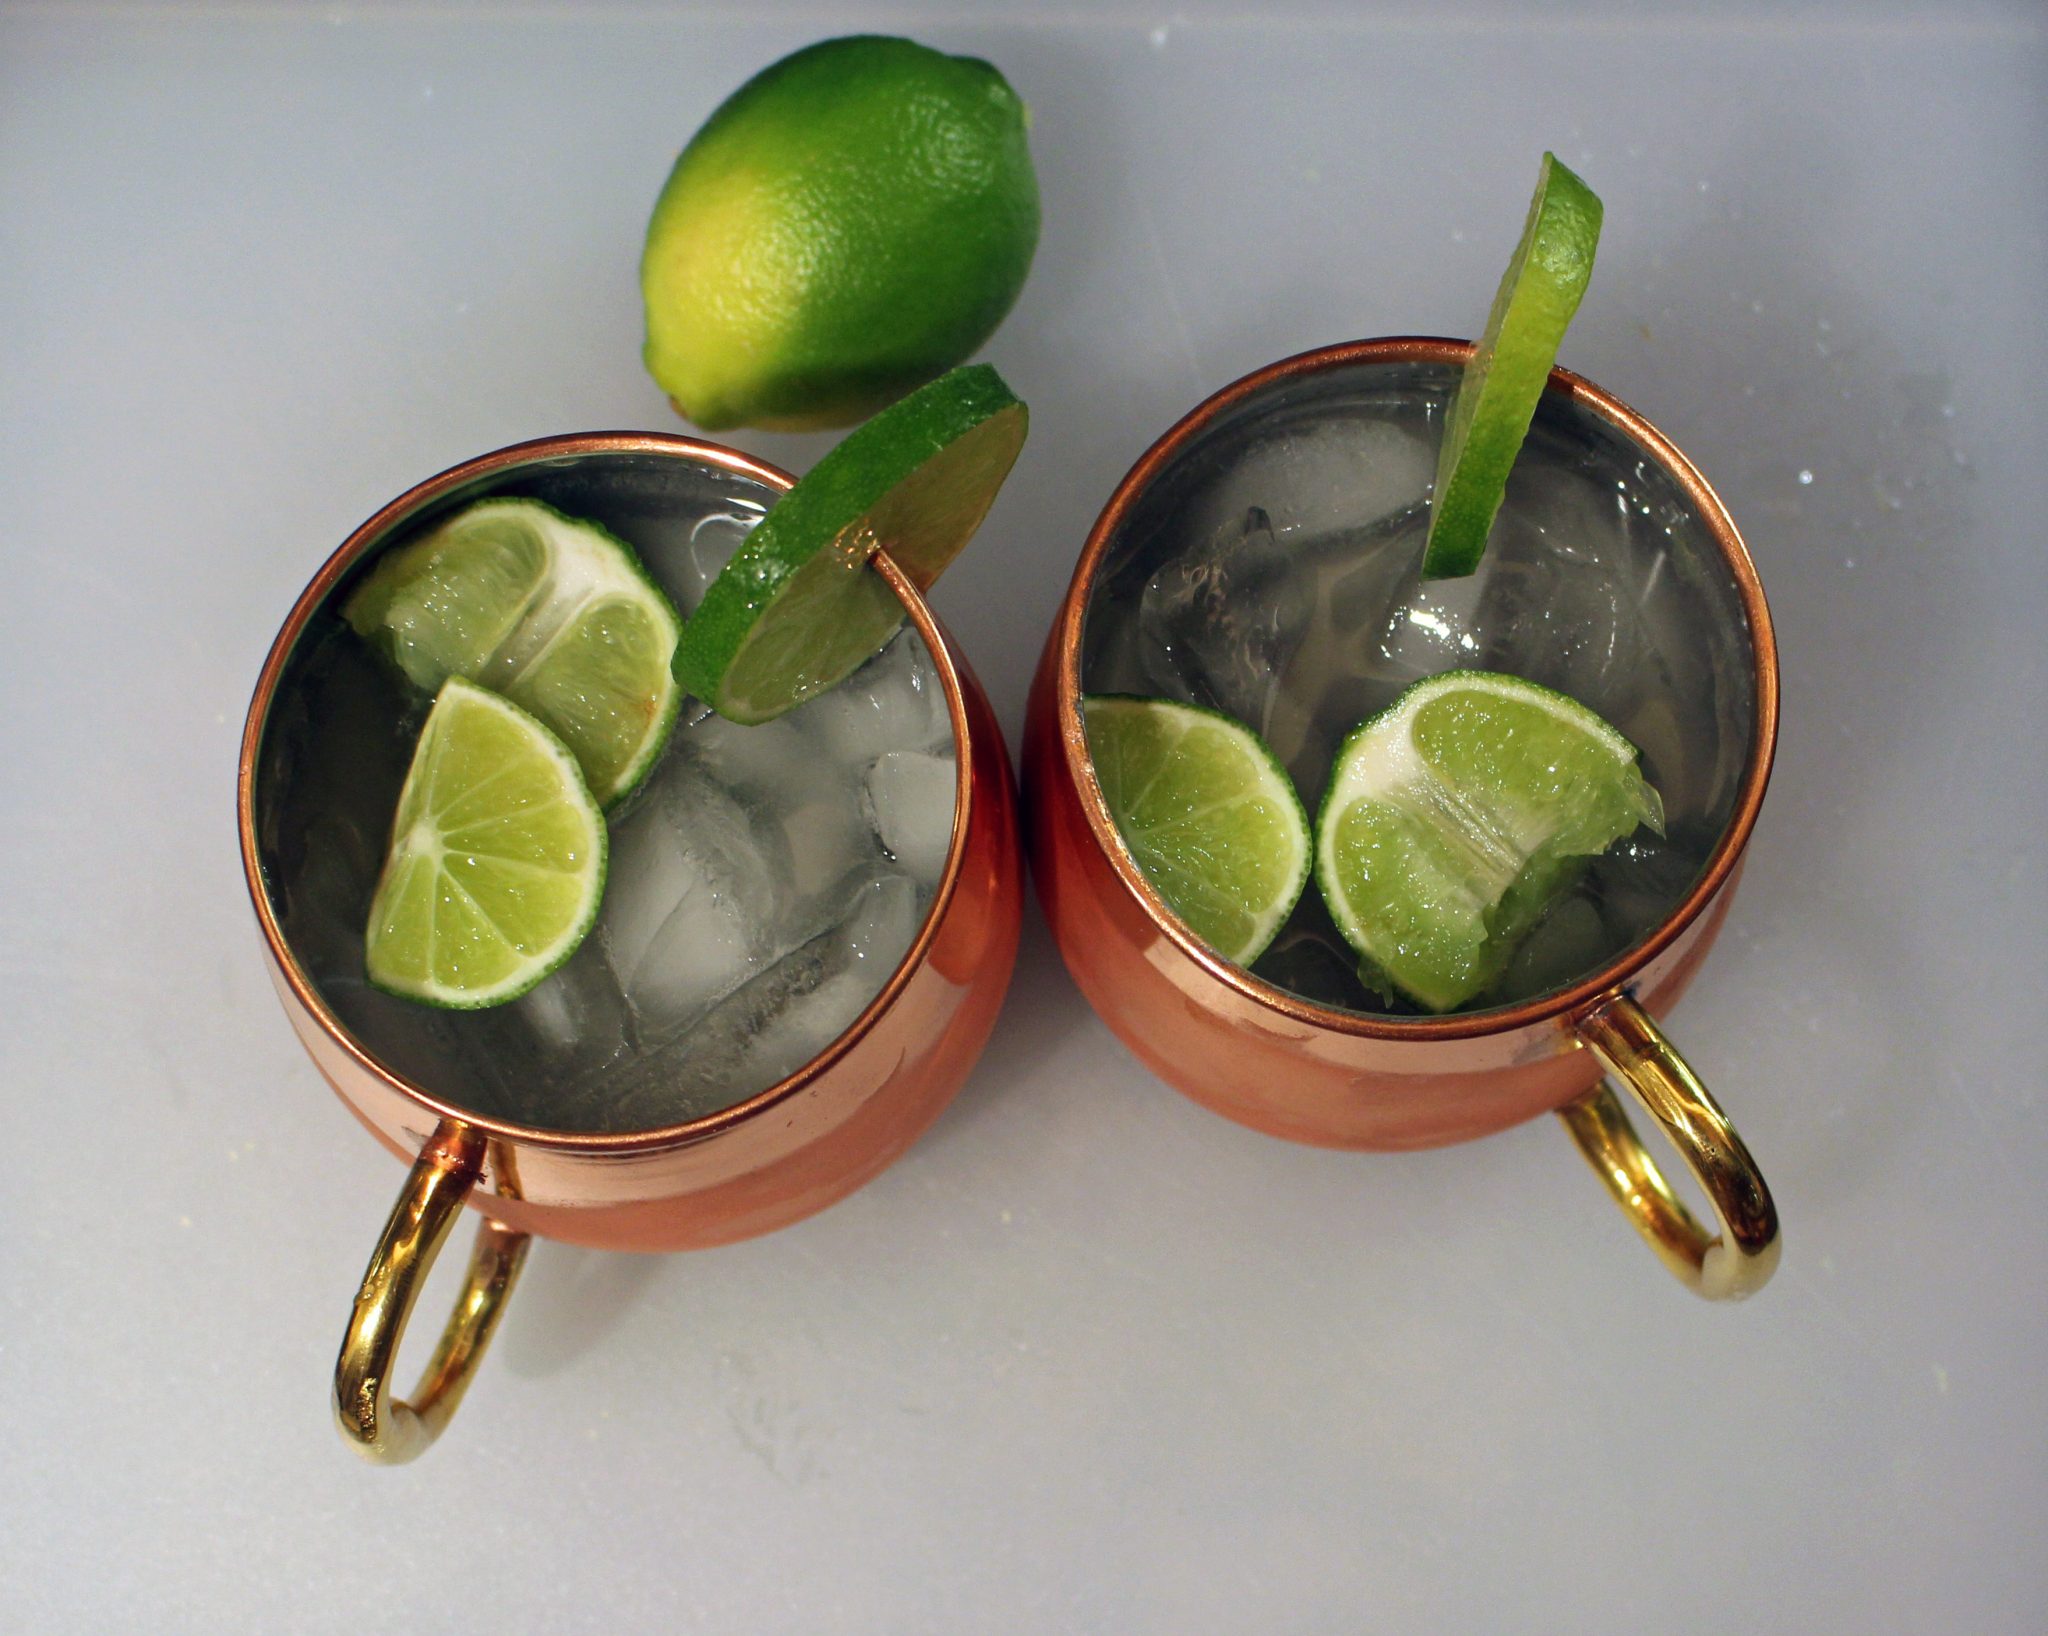 Moscow Mule | Glass of Glam - Dry January Wasn't A Month of Enlightenment and Rainbows by popular Chicago lifestyle blogger Glass of Glam